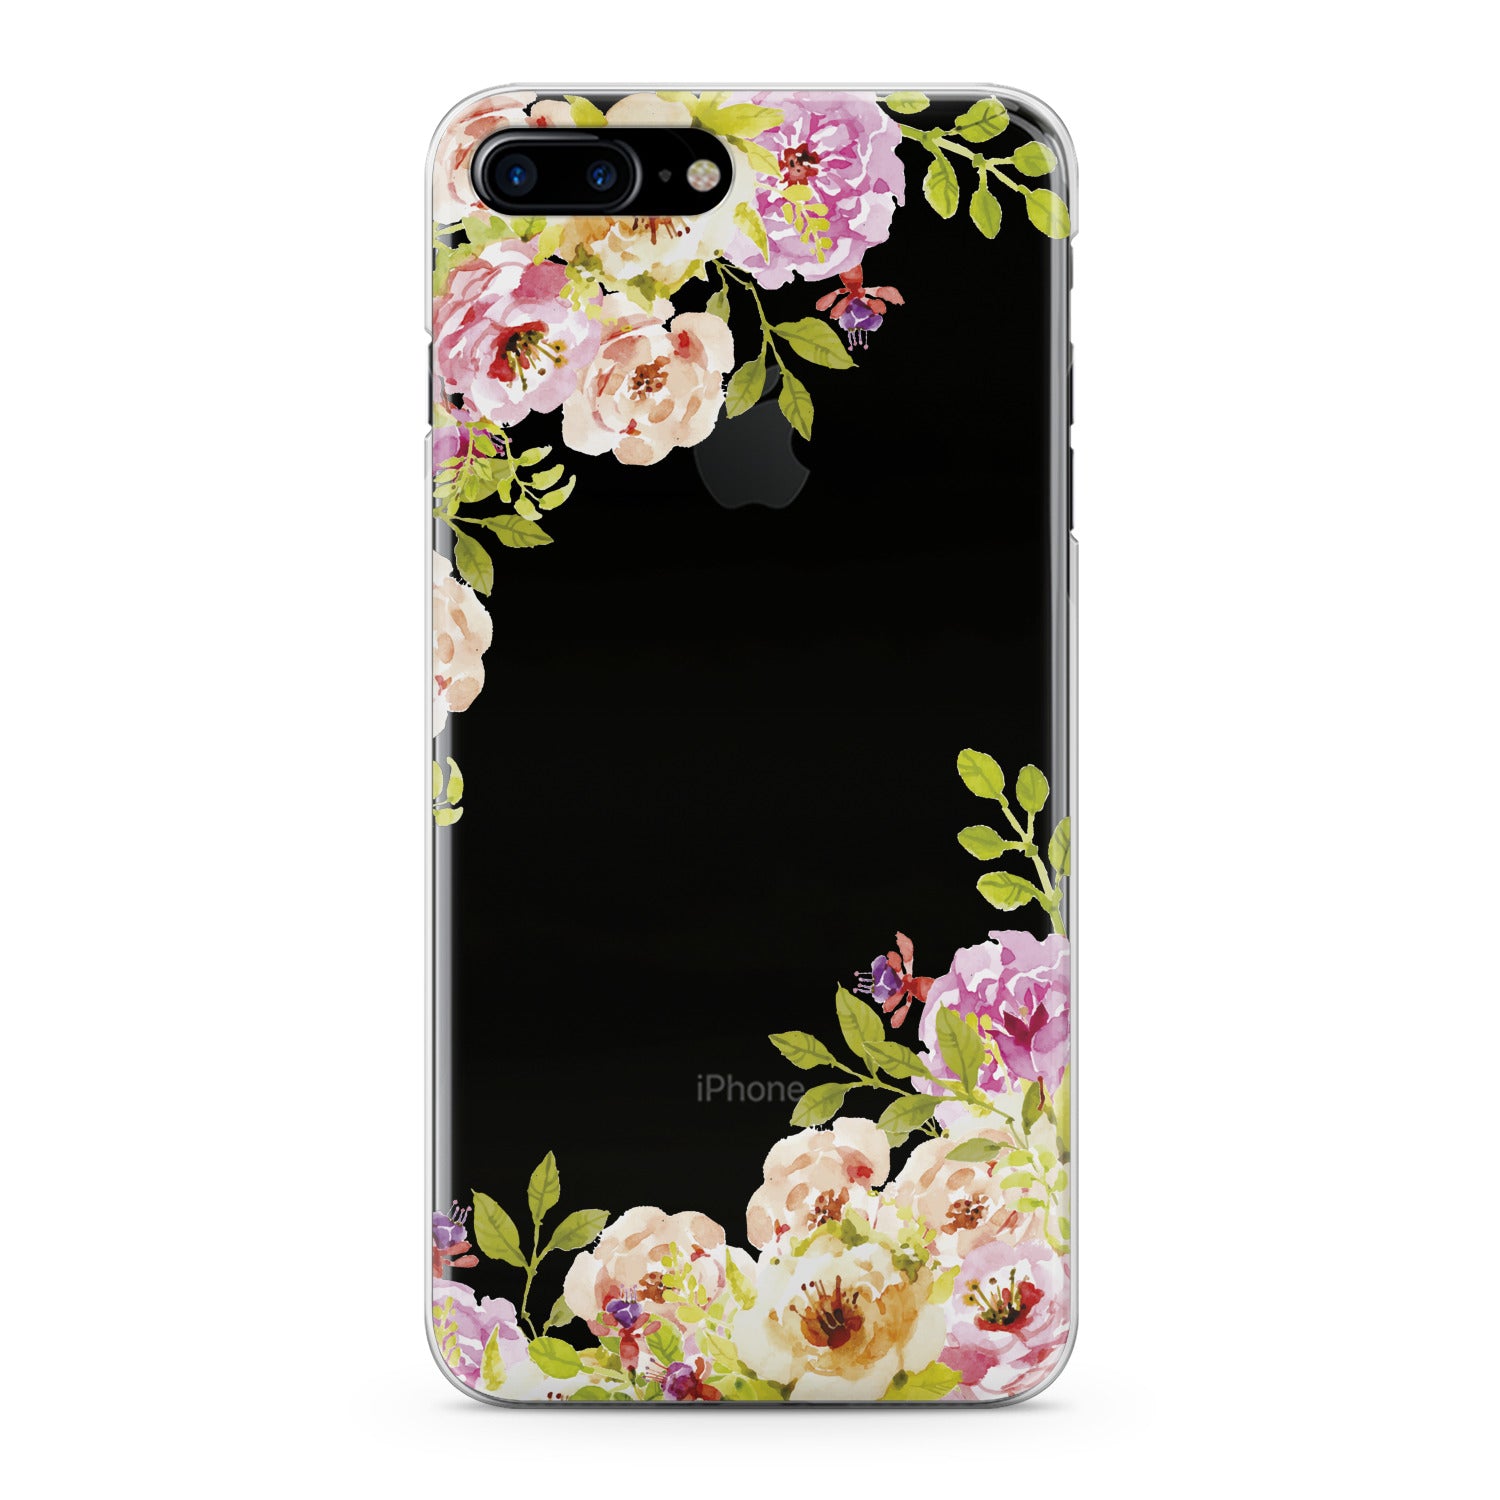 Lex Altern Garden Blossom Phone Case for your iPhone & Android phone.